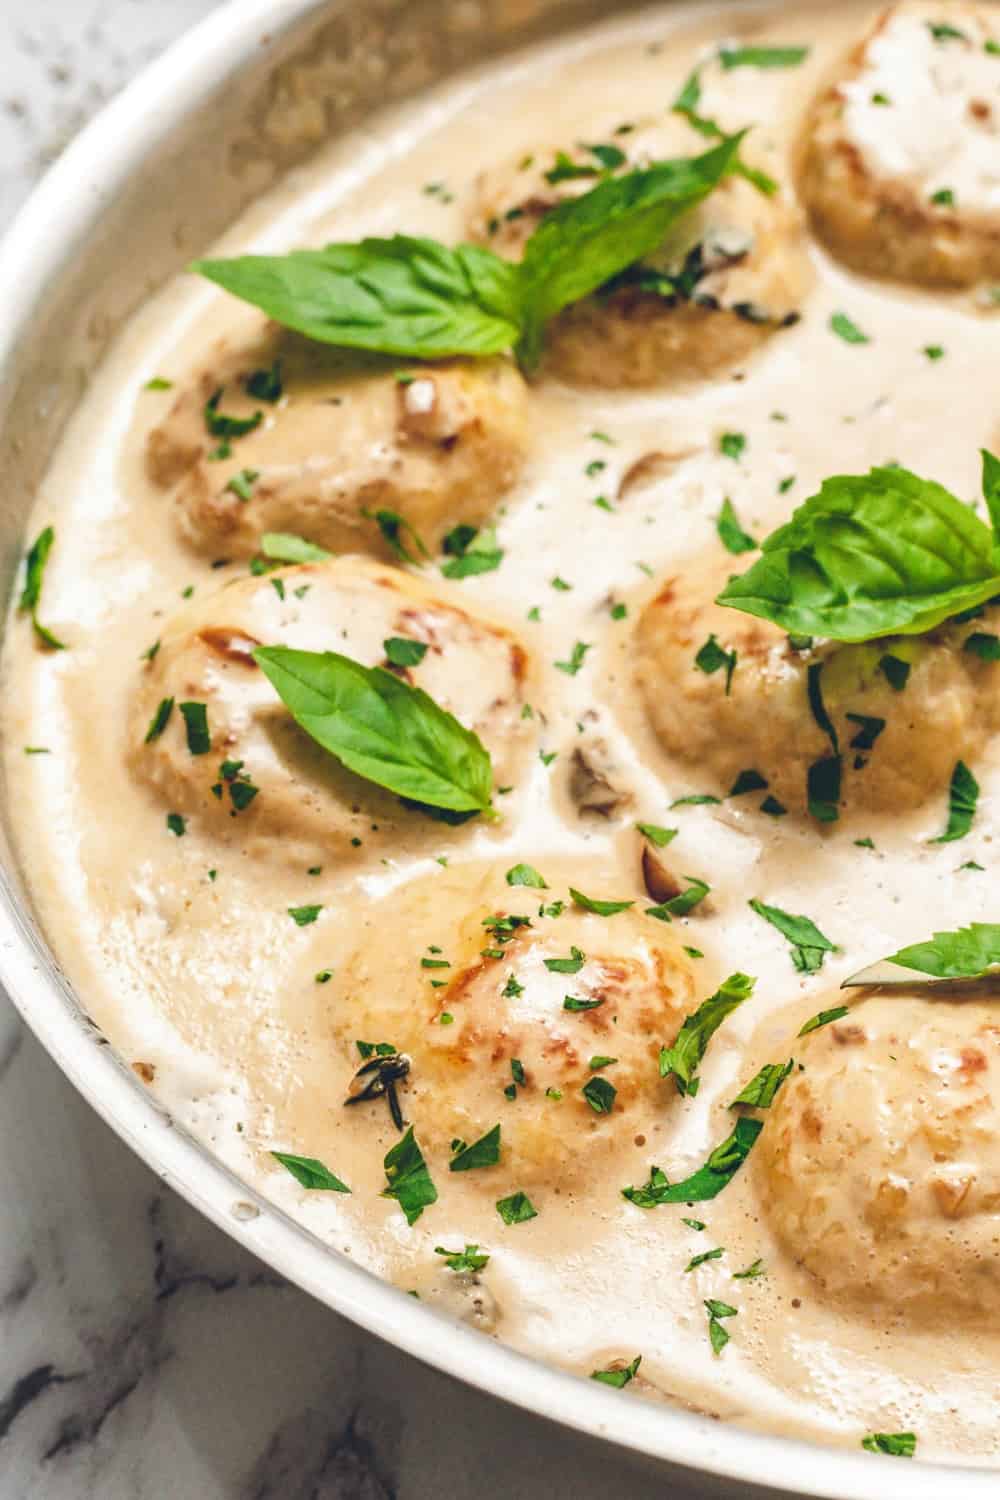 Creamy Chicken Meatballs tossed in a skillet filled with pasta, sauce, and basil leaves.